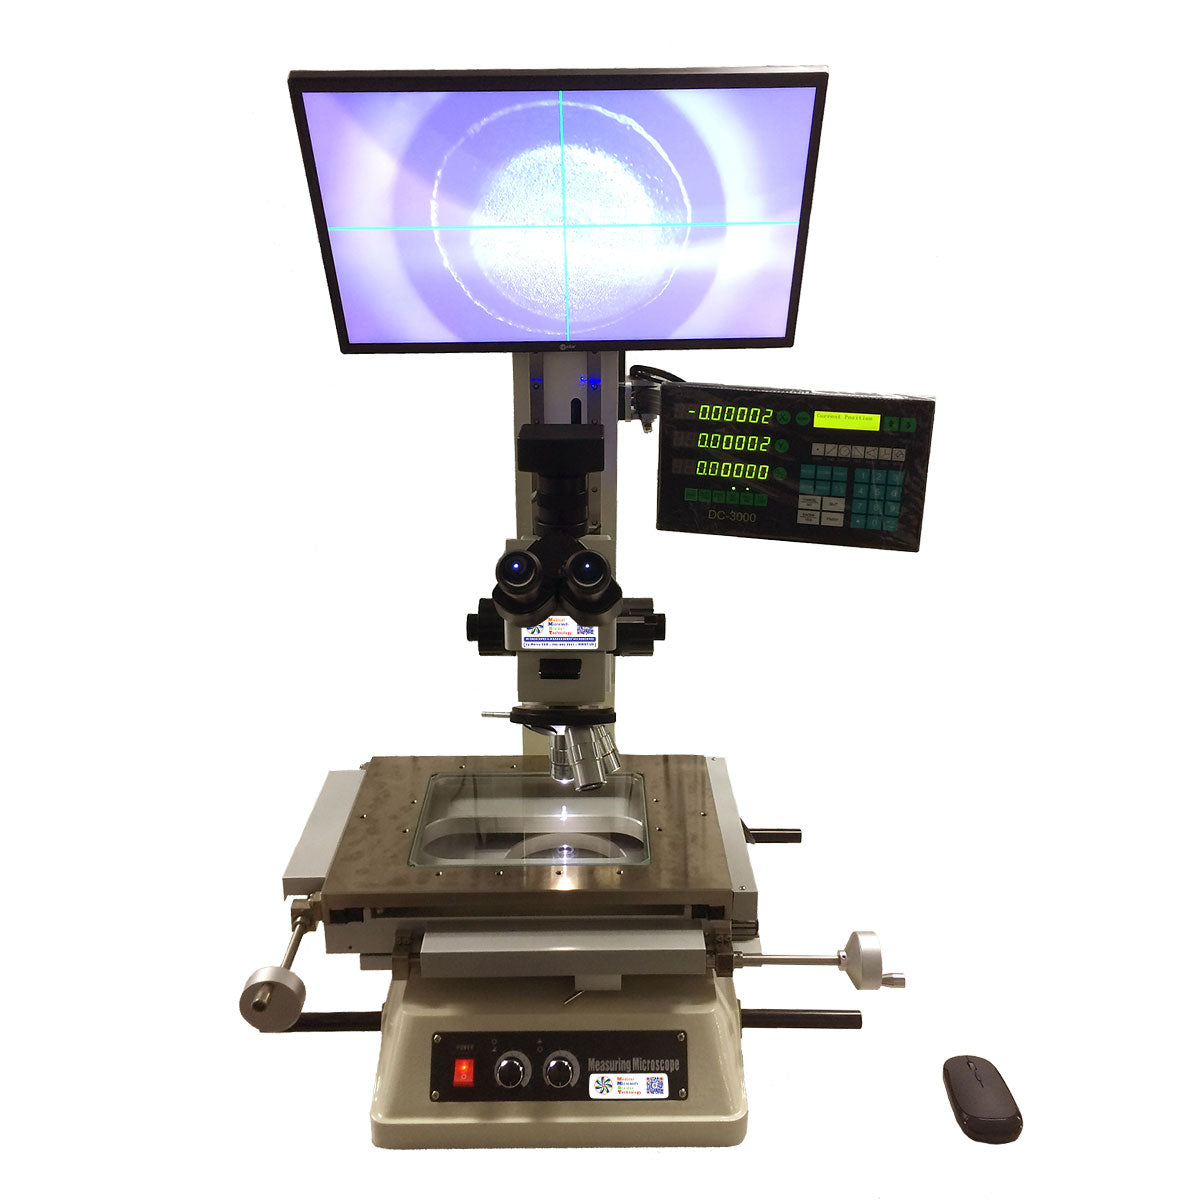 mmbt-800-xyz-tool-scope-measurement-microscope-display-monitor-front-view